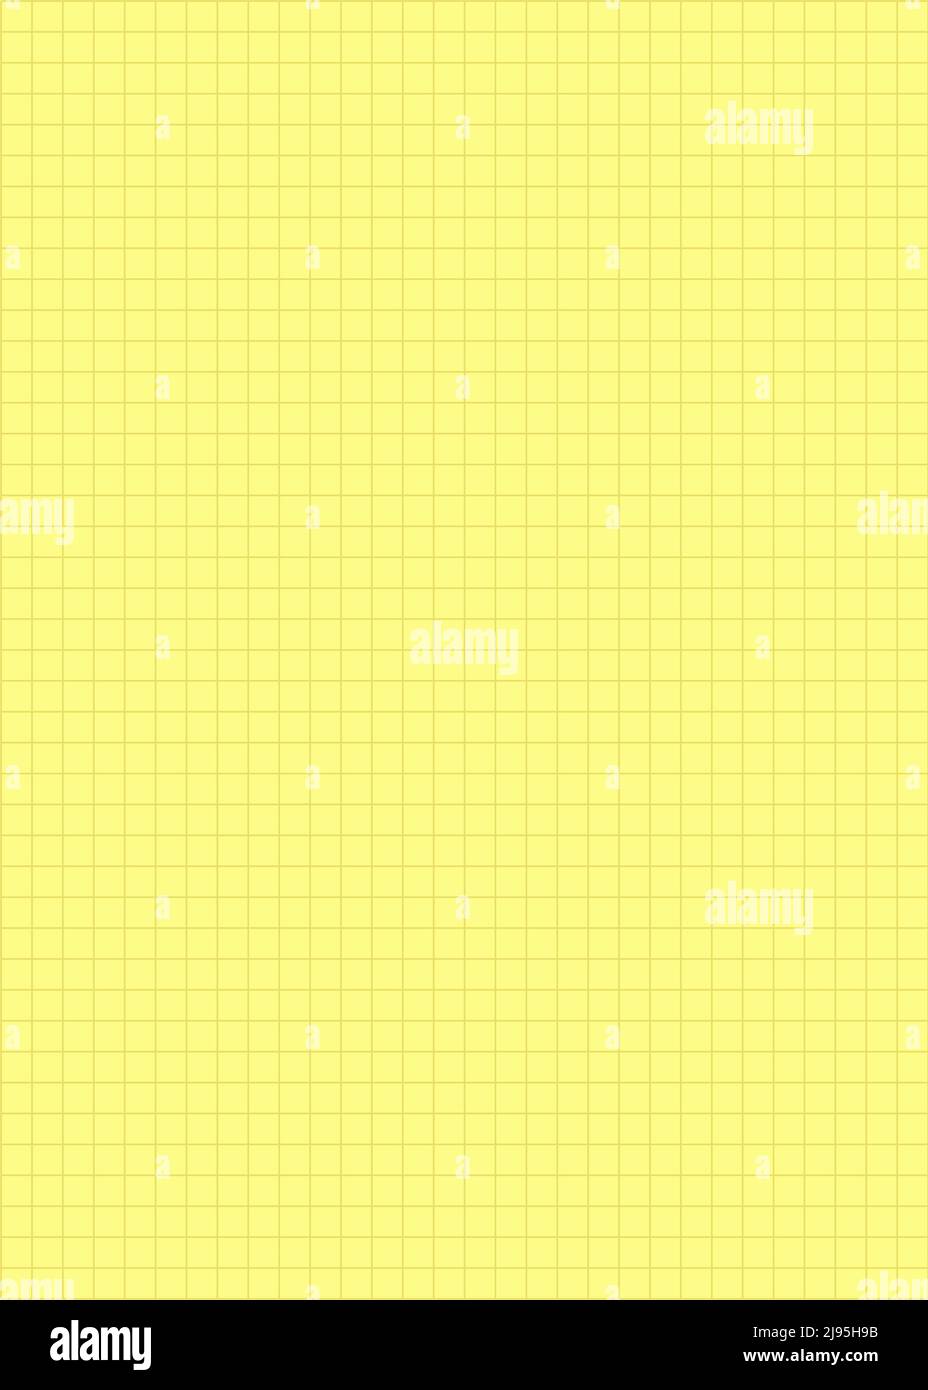 Blank notebook sheet with margins and yellow squares For planner, school, print A5 Checkered pattern Papers homework and exercises Vertical editable m Stock Vector